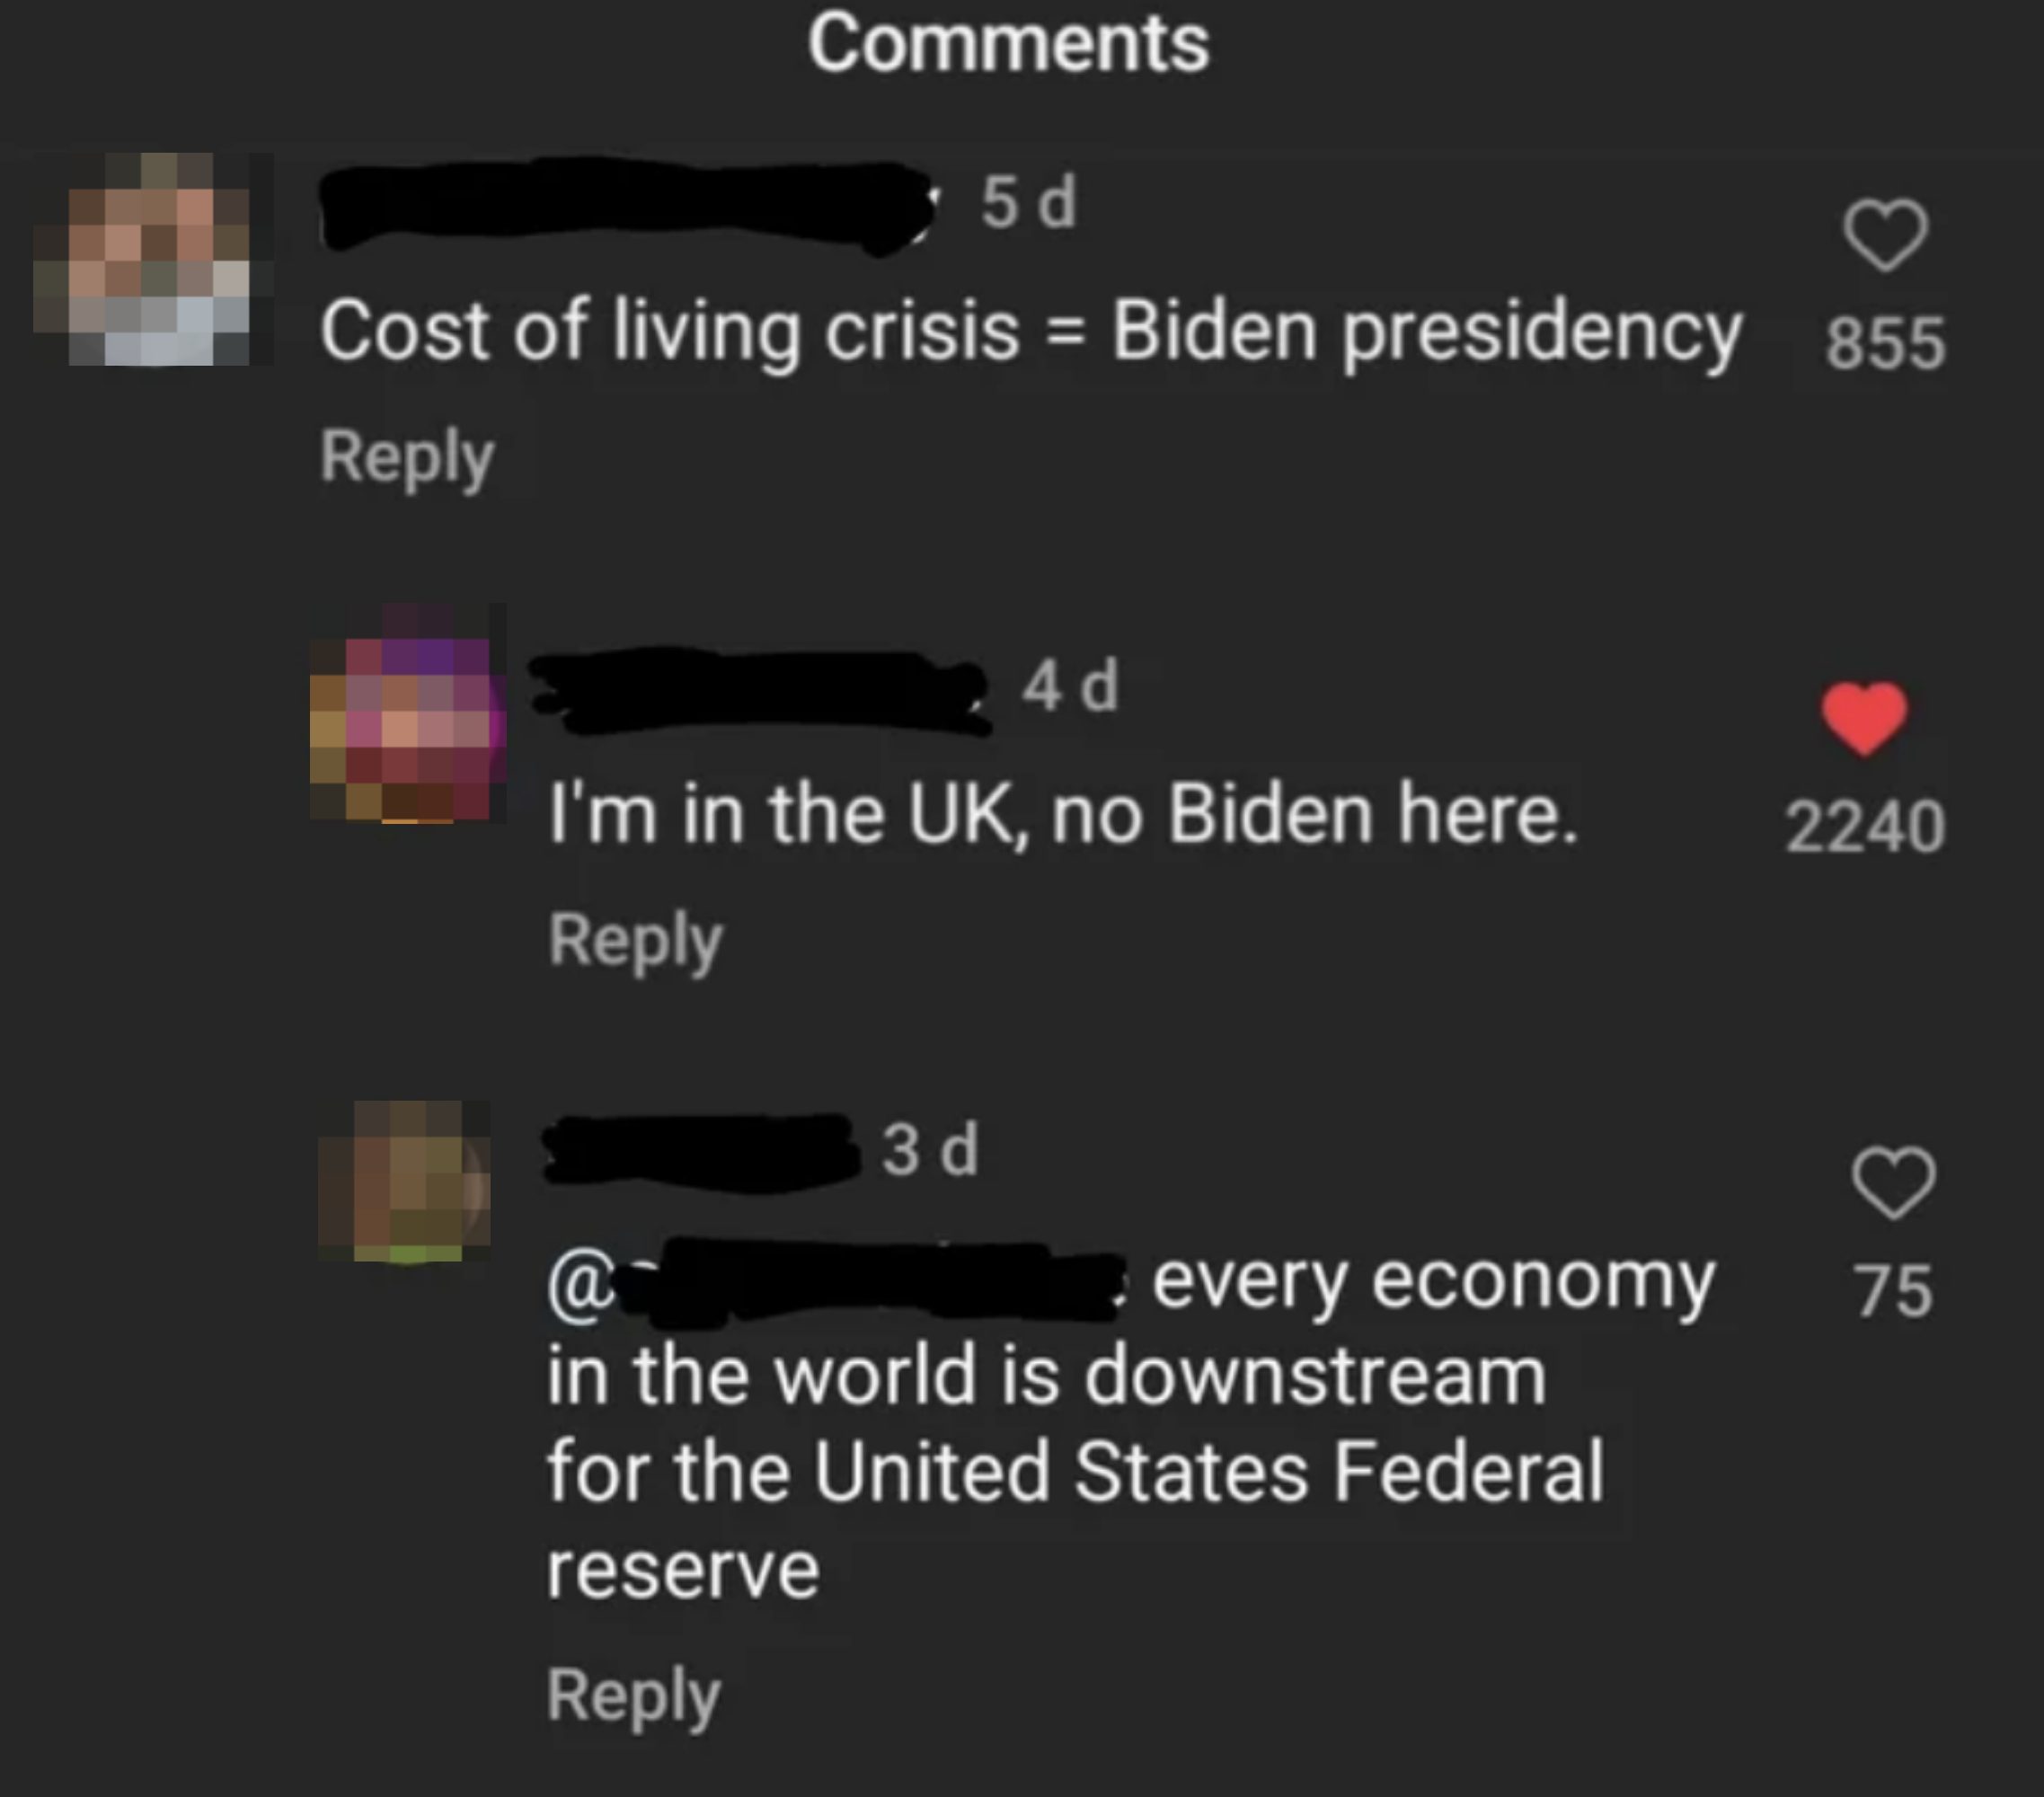 person says the cost of living crisis is caused by the biden presidency and another replying they&#x27;re in the UK. Third person says &quot;every economy in the world is downstream for the united states federal resevre&quot;